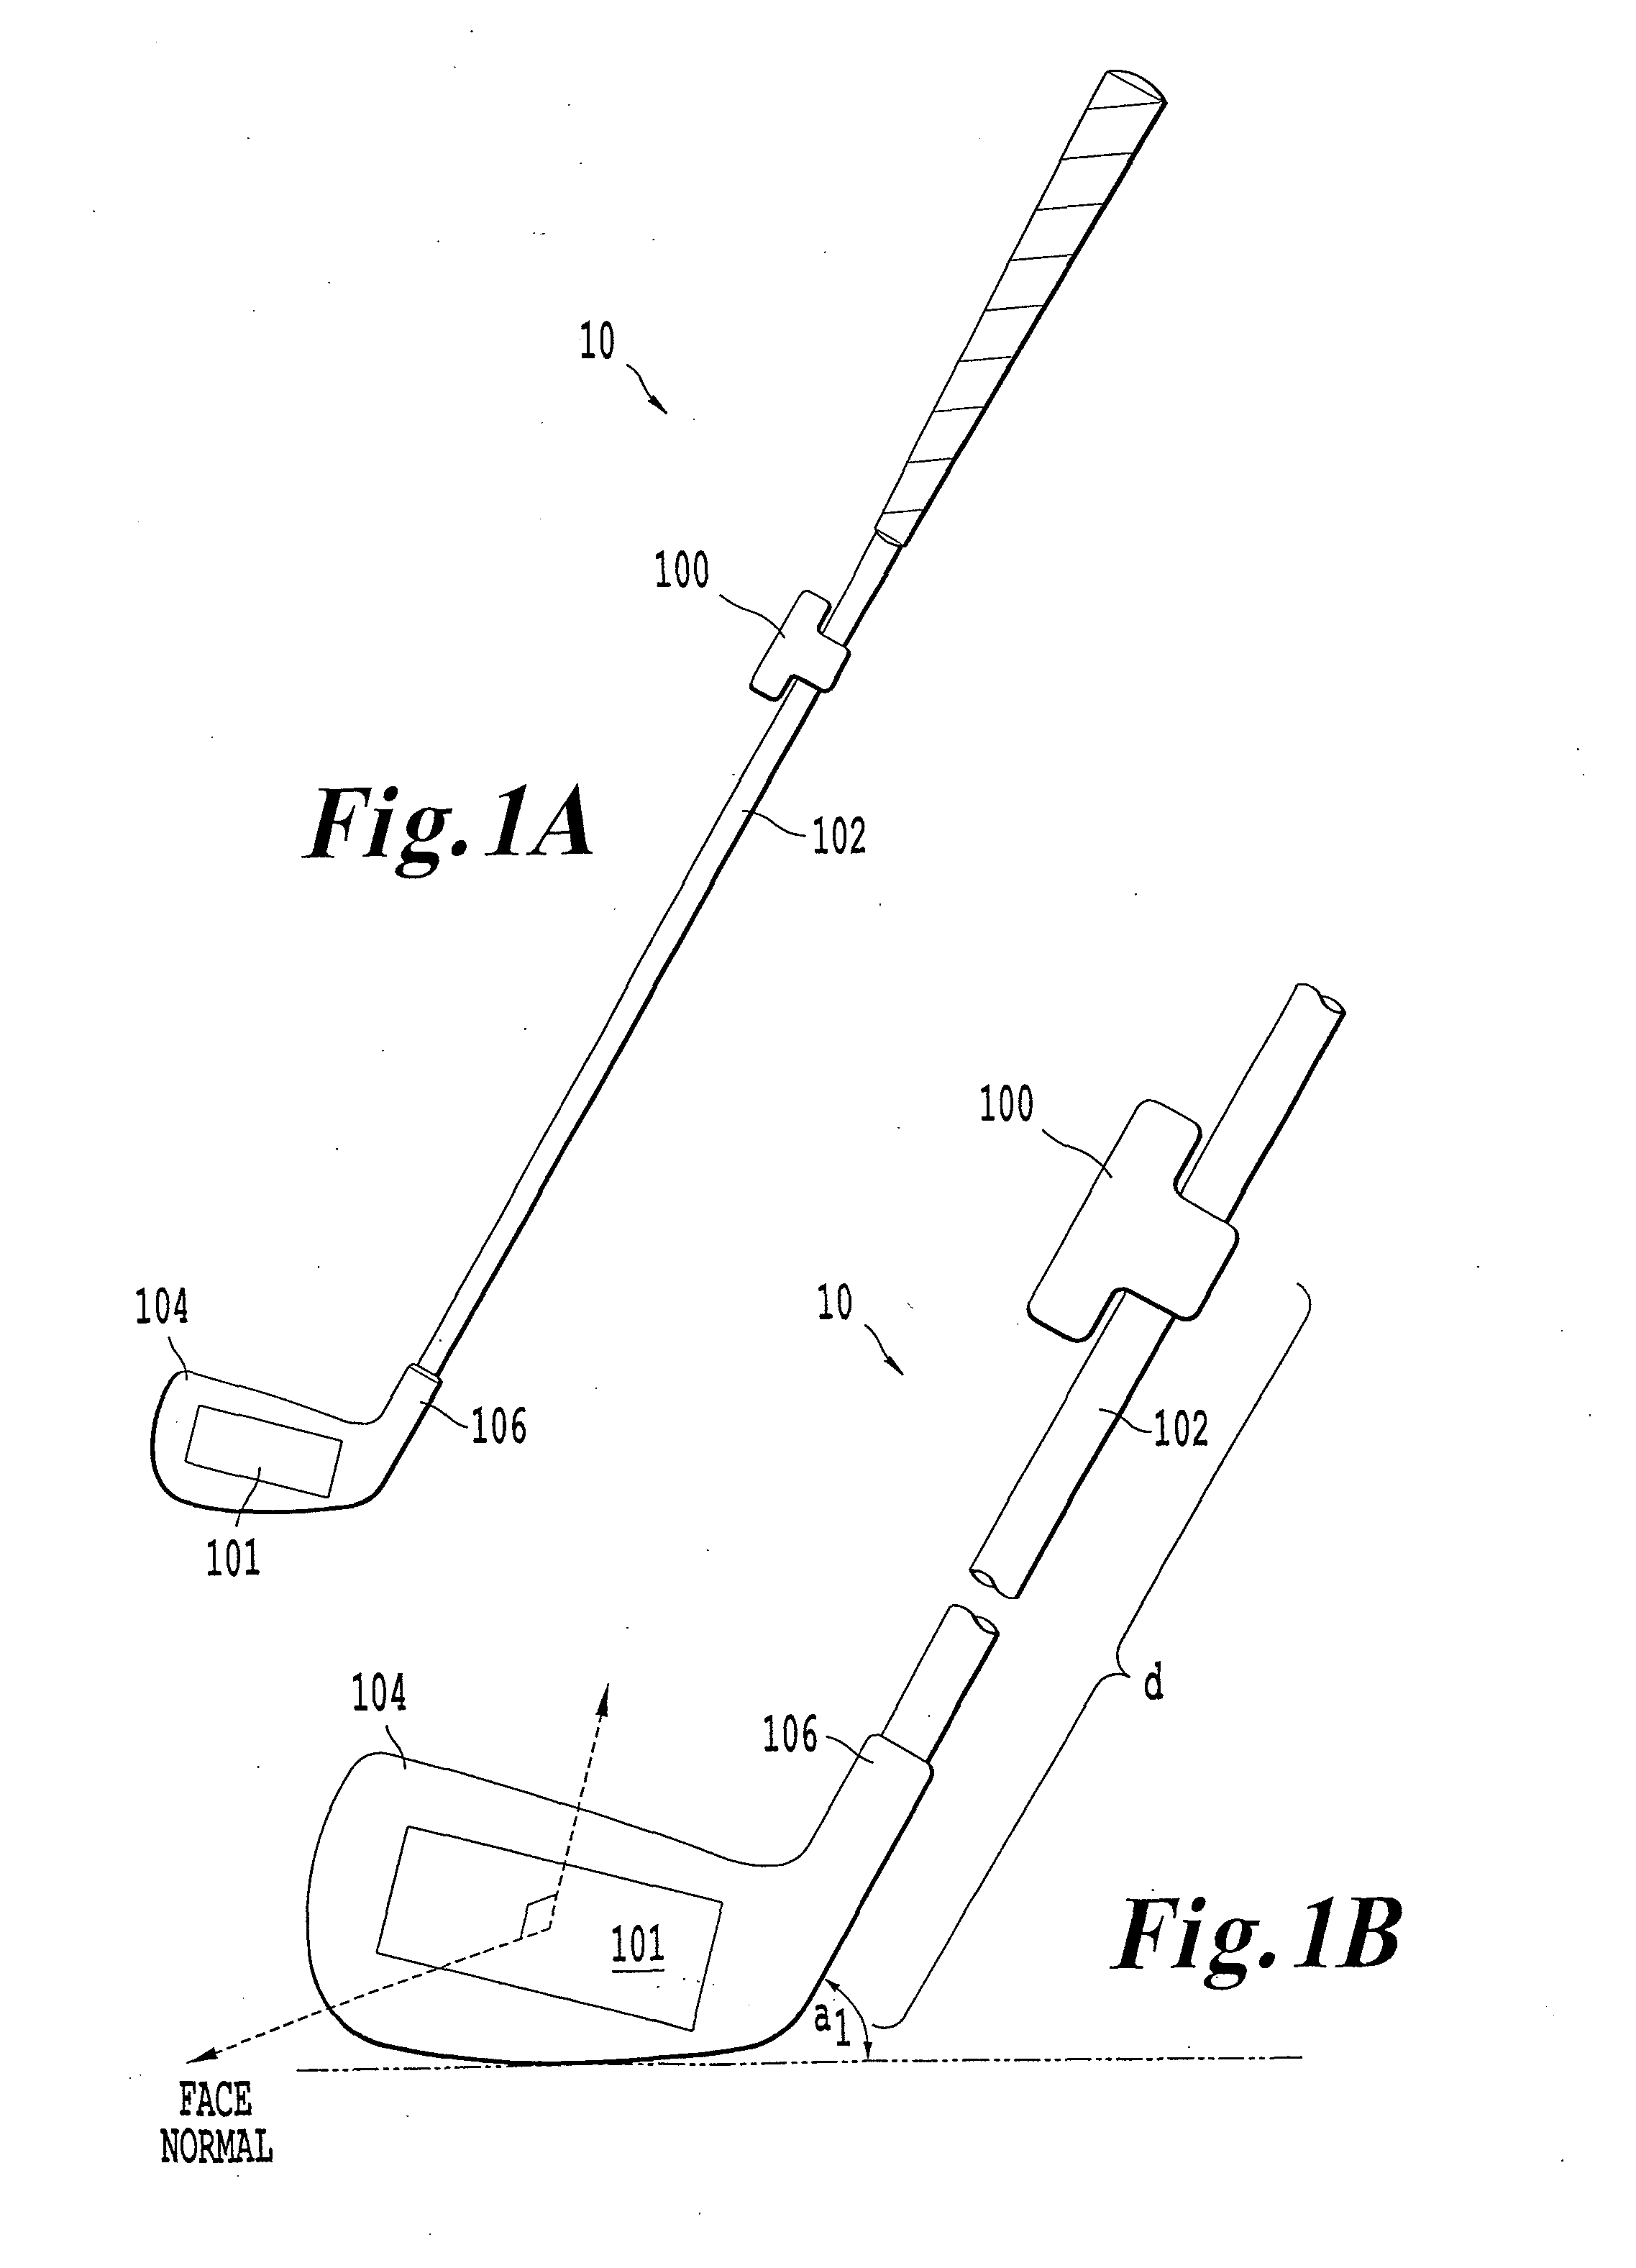 Method and apparatus for determining a relative orientation of points on a rigid body